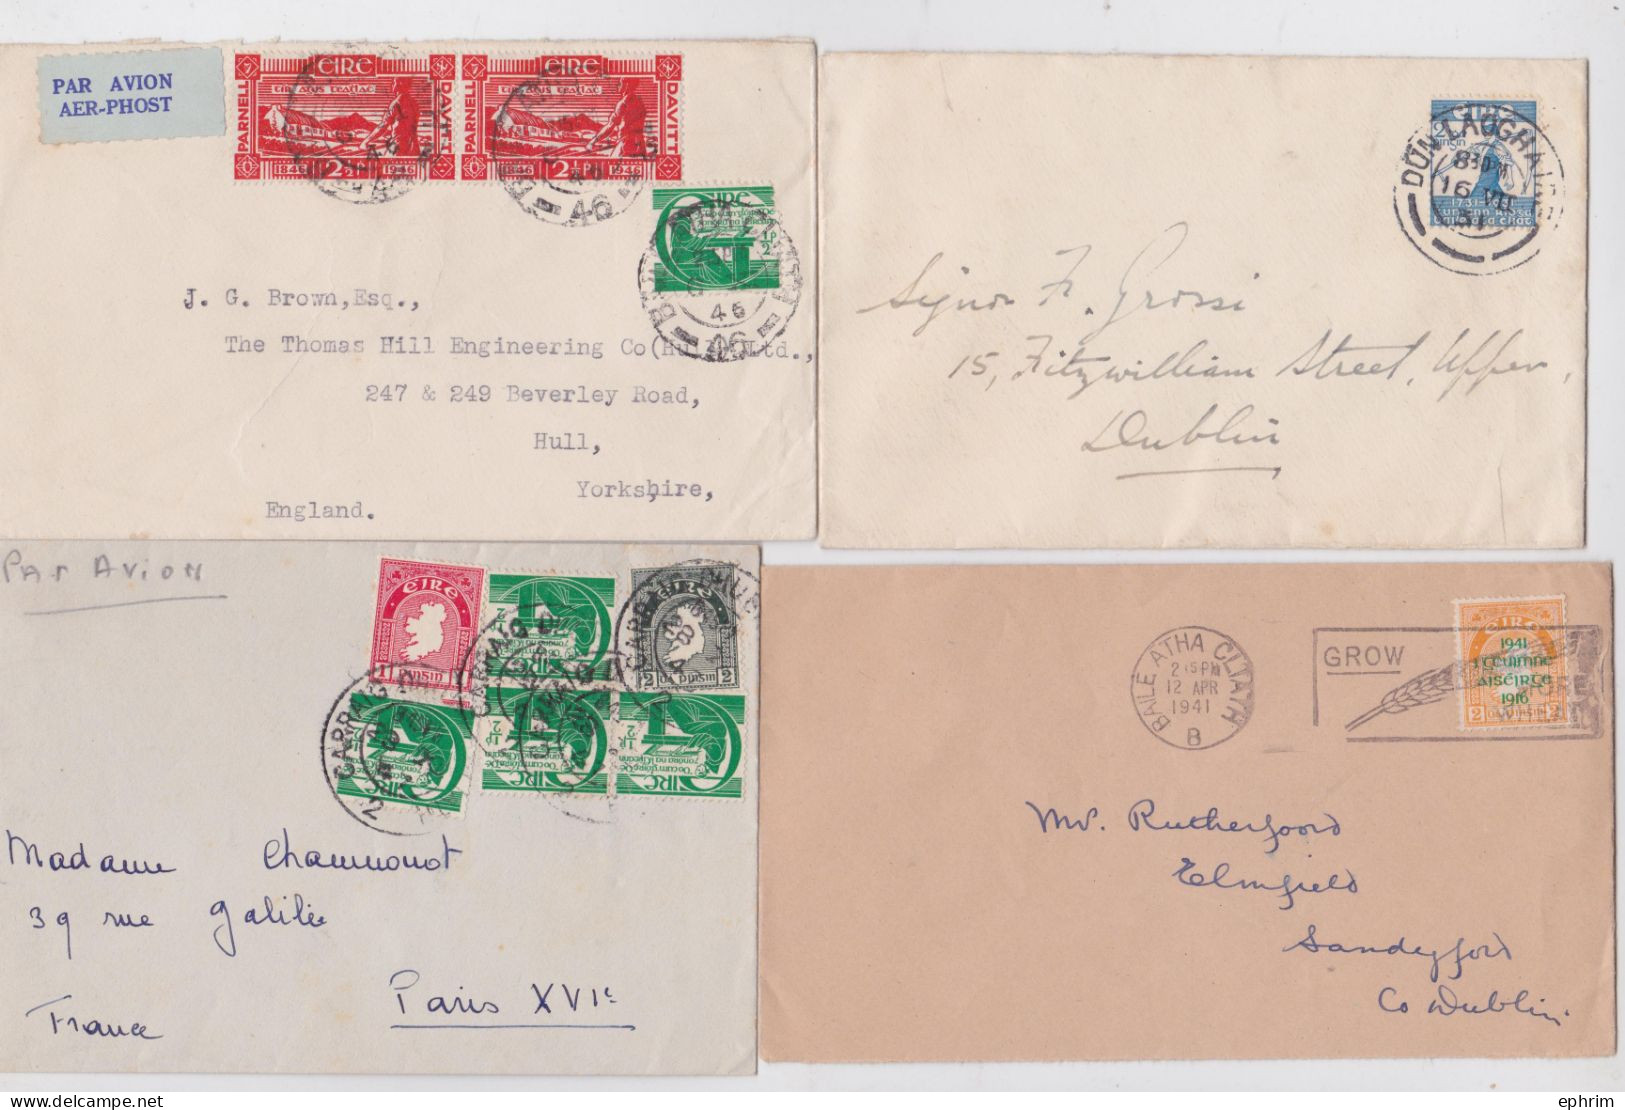 Irlande Eire Ireland Stamp Short Old Mail Cover Lettre Timbre Lot 16 Lettres Anciennes Baile Atha Cliath Dun Laoghaire.. - Collections, Lots & Series